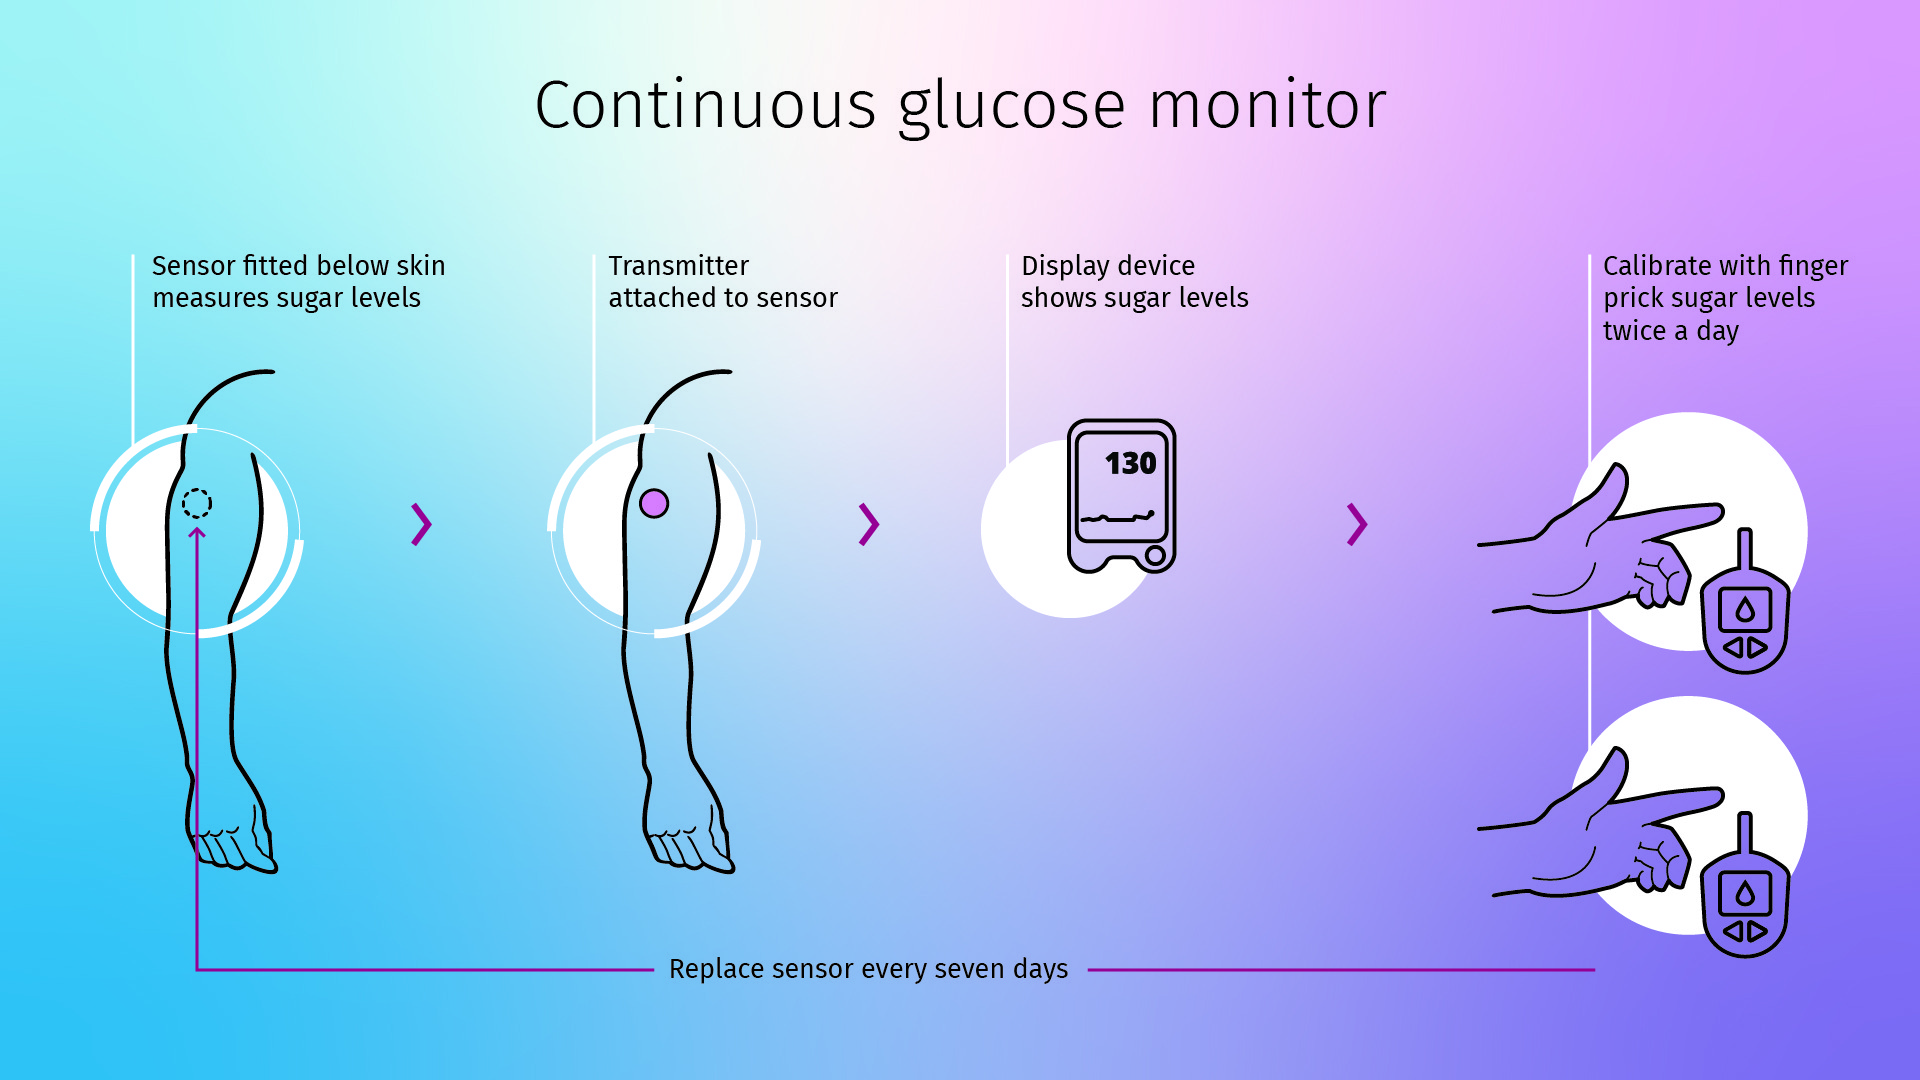 Slide with the title 'Continuous glucose monitor' giving some information about how the monitor works with clear, illustrative visuals. 